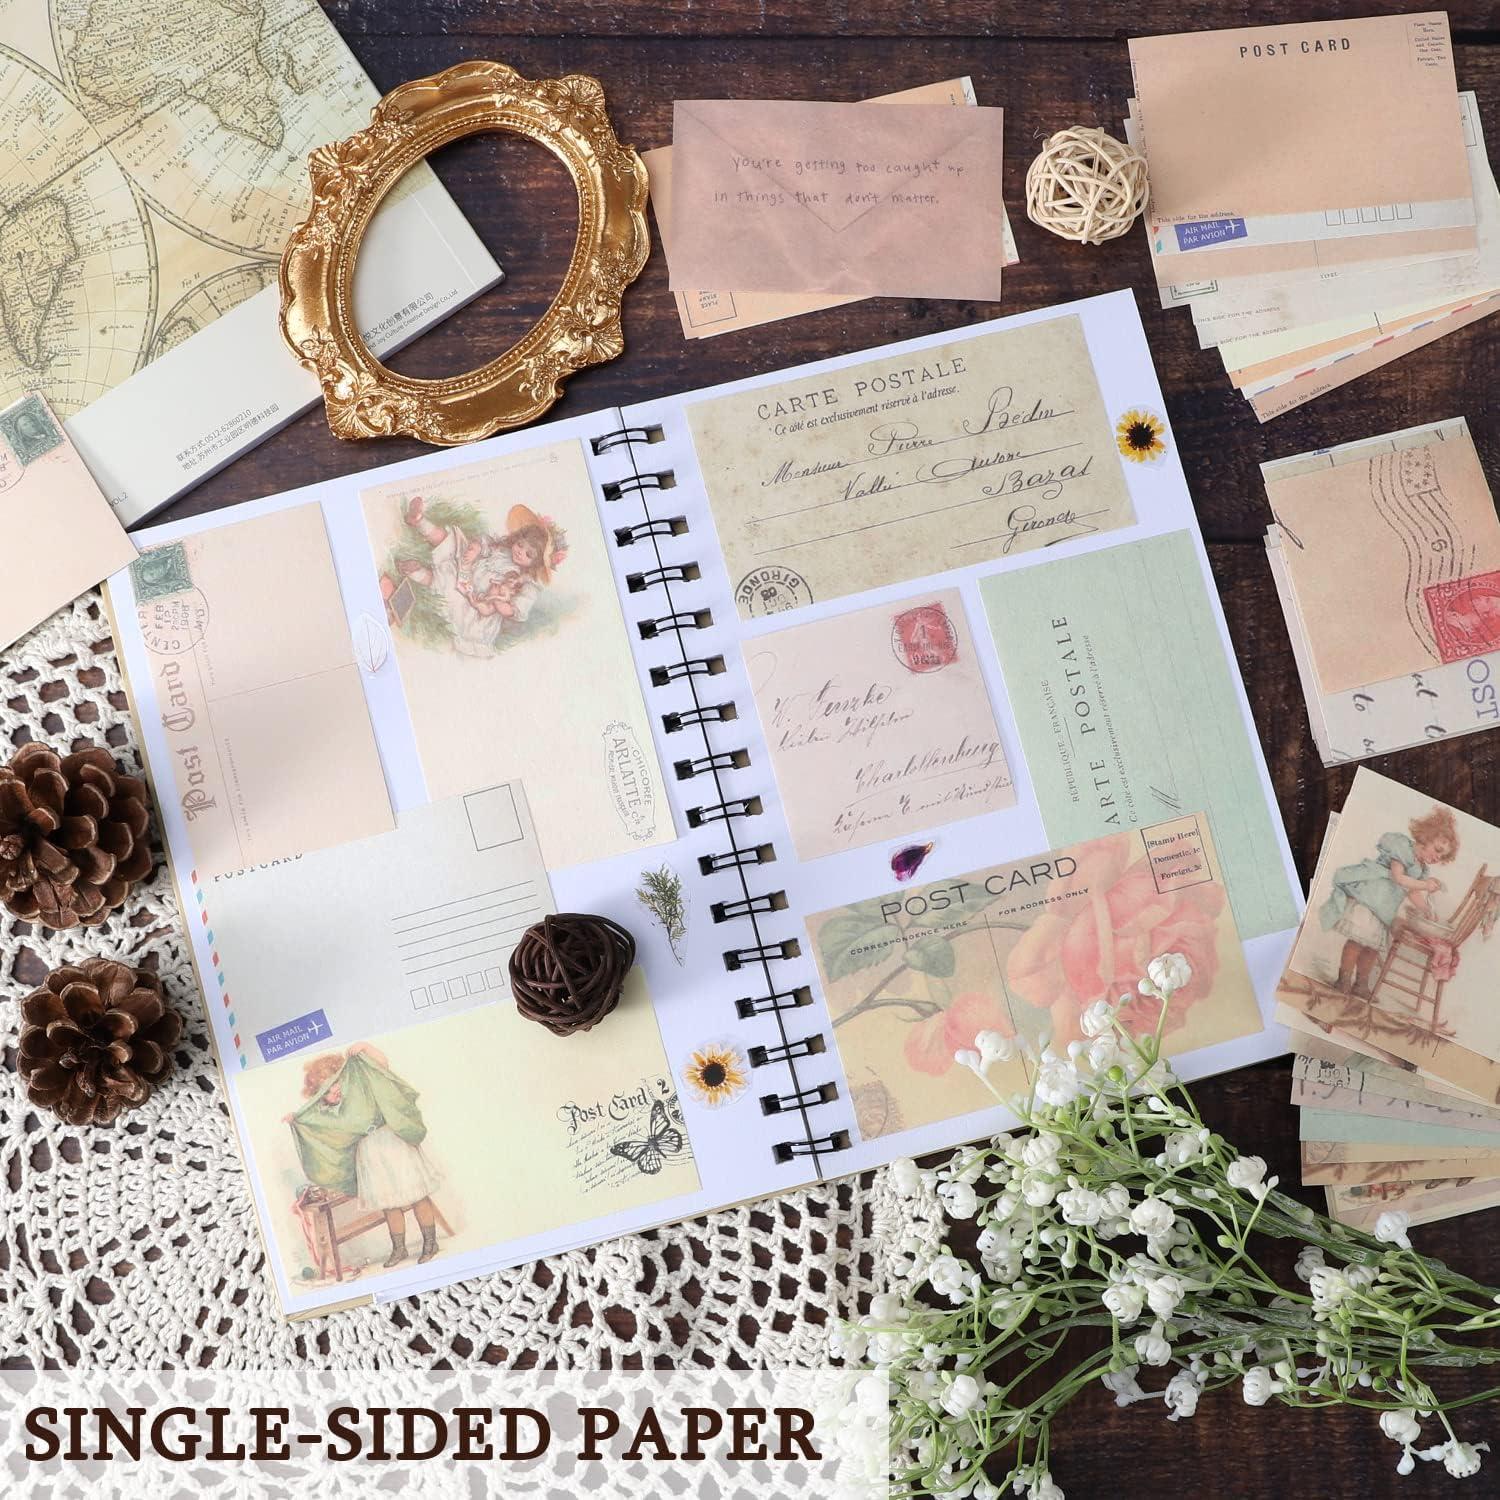 Vintage Junk Journal Stickers - Decorate Your Planner and Scrapbook